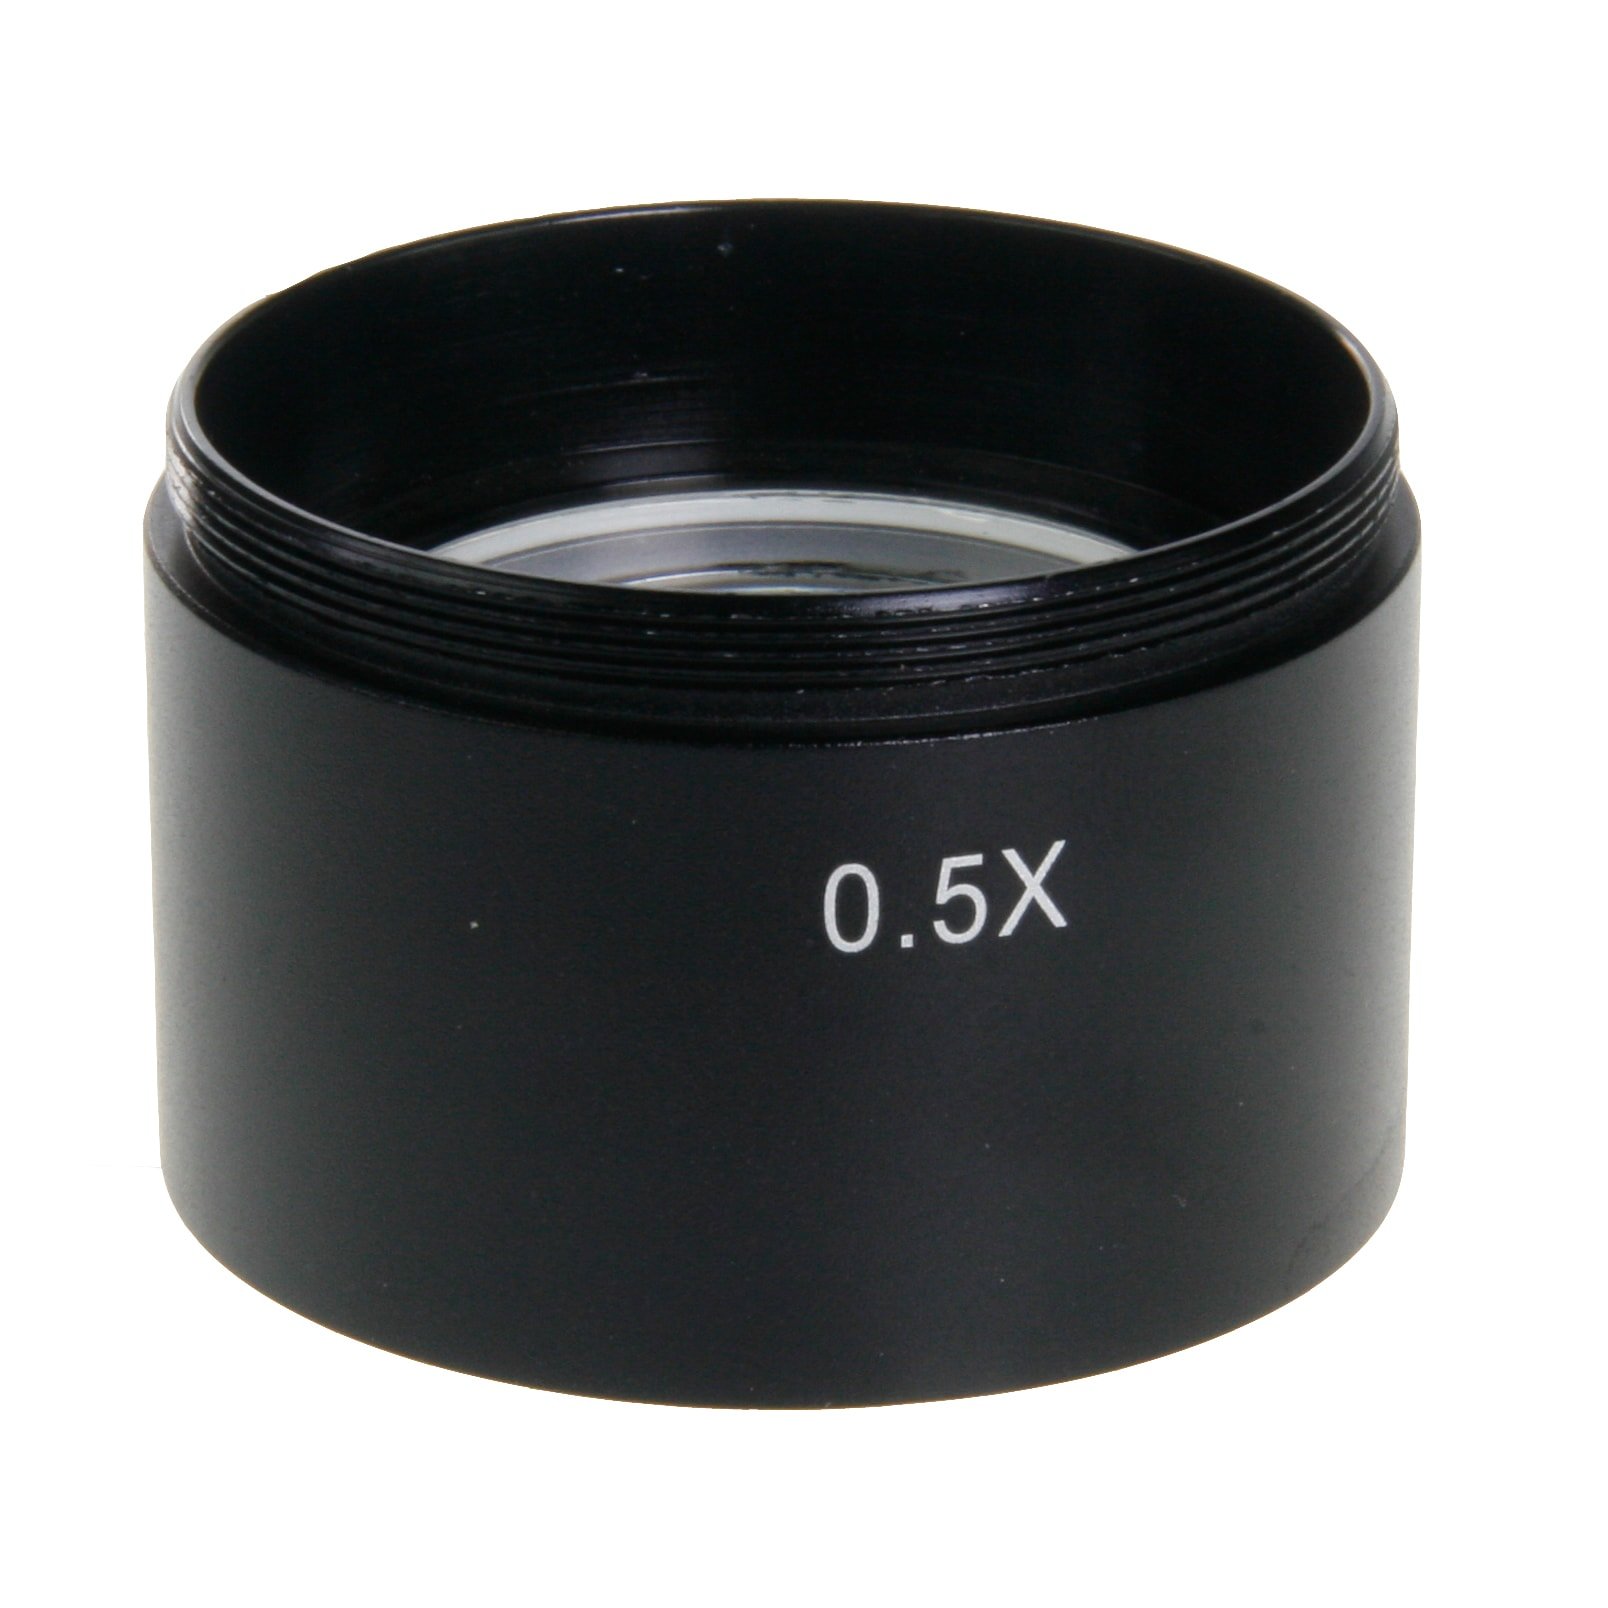 Additional 0.5x Lens for NexiusZoom